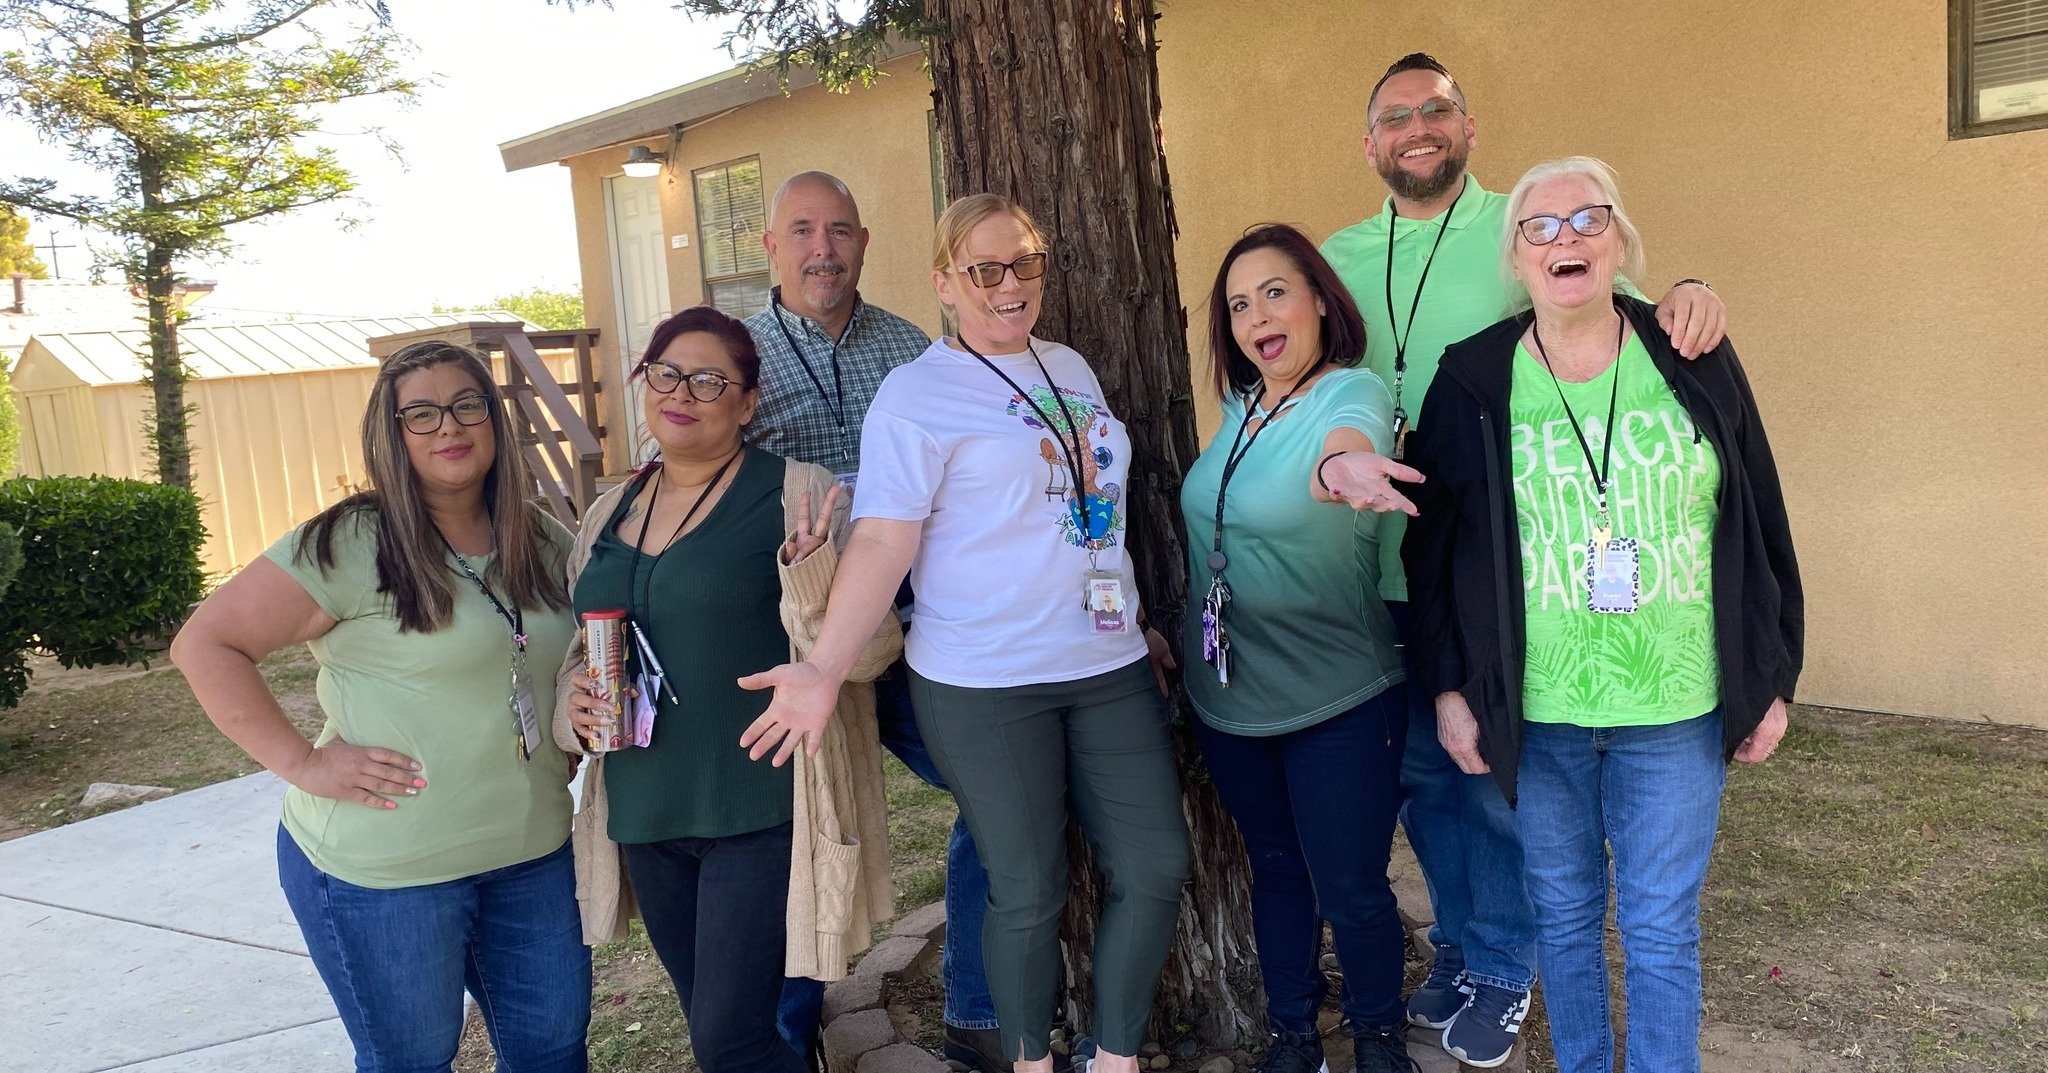 Our team is kicking off May by wearing green to show support for Mental Health Month. Let's spread awareness together, all month our teams will be participating in activities to spread awareness, practice self care, and reduce stigma in the community